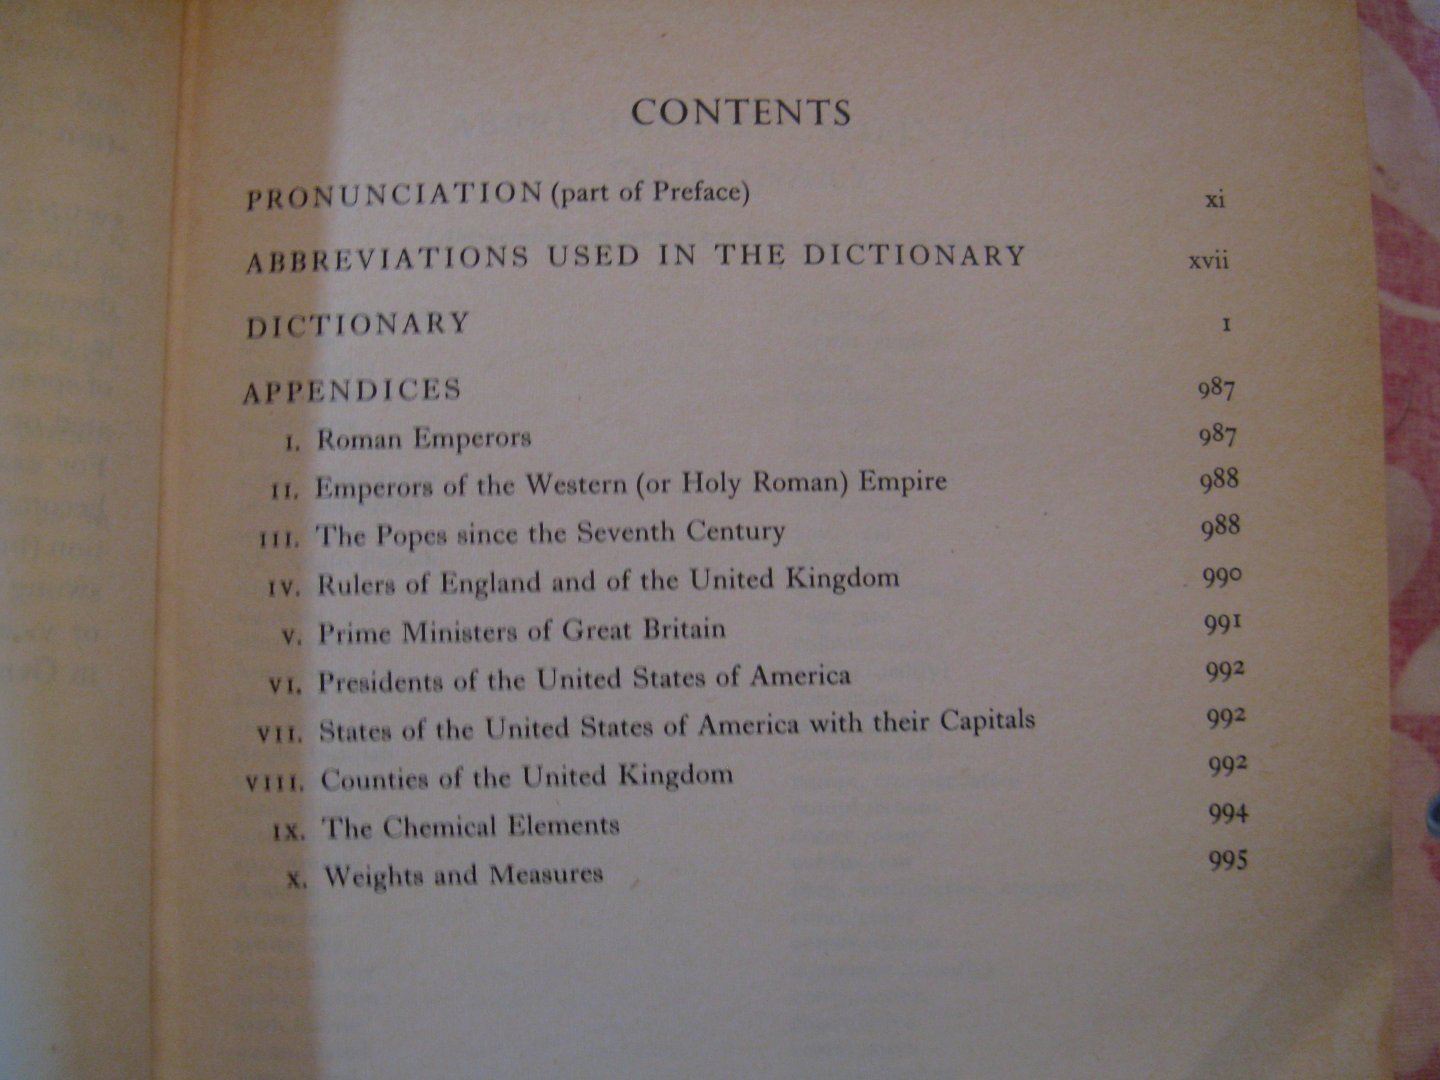 J. coulson - the oxford illustrated dictionary